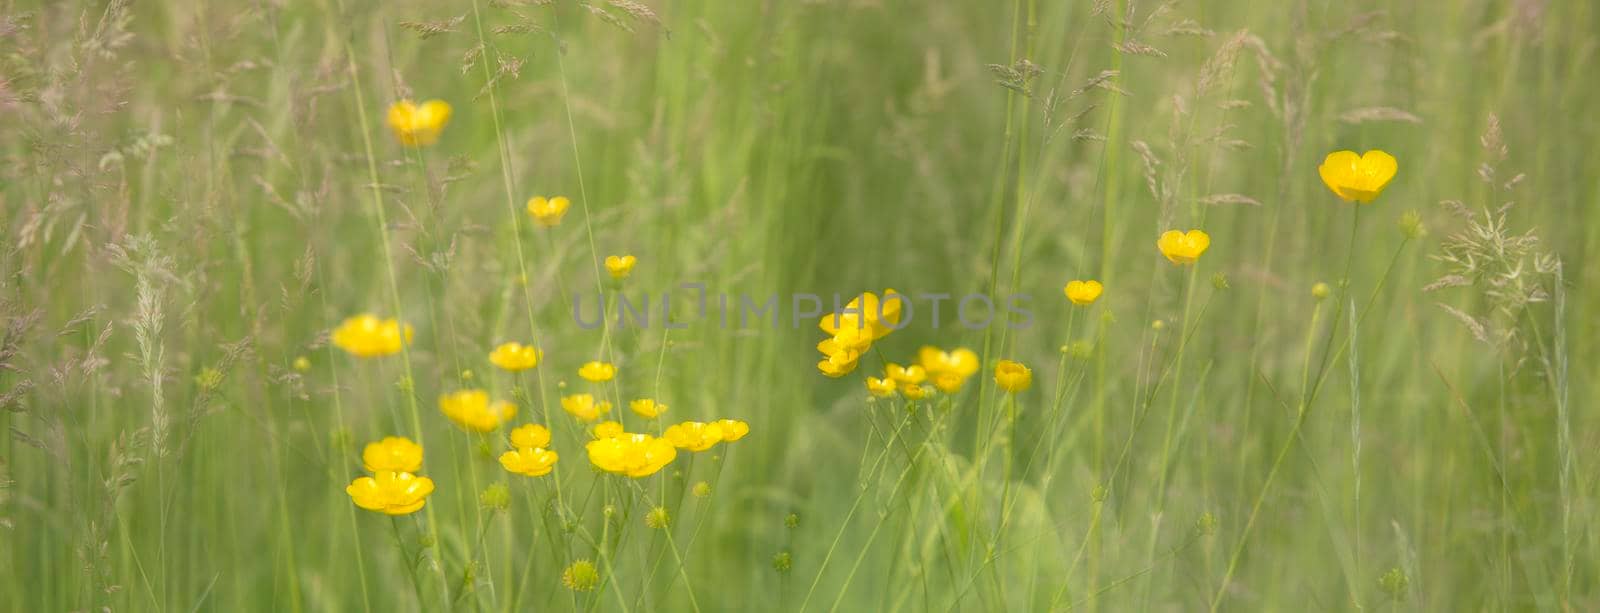 yellow buttercups on green in dreamy fantasy abstract pattern by ahavelaar